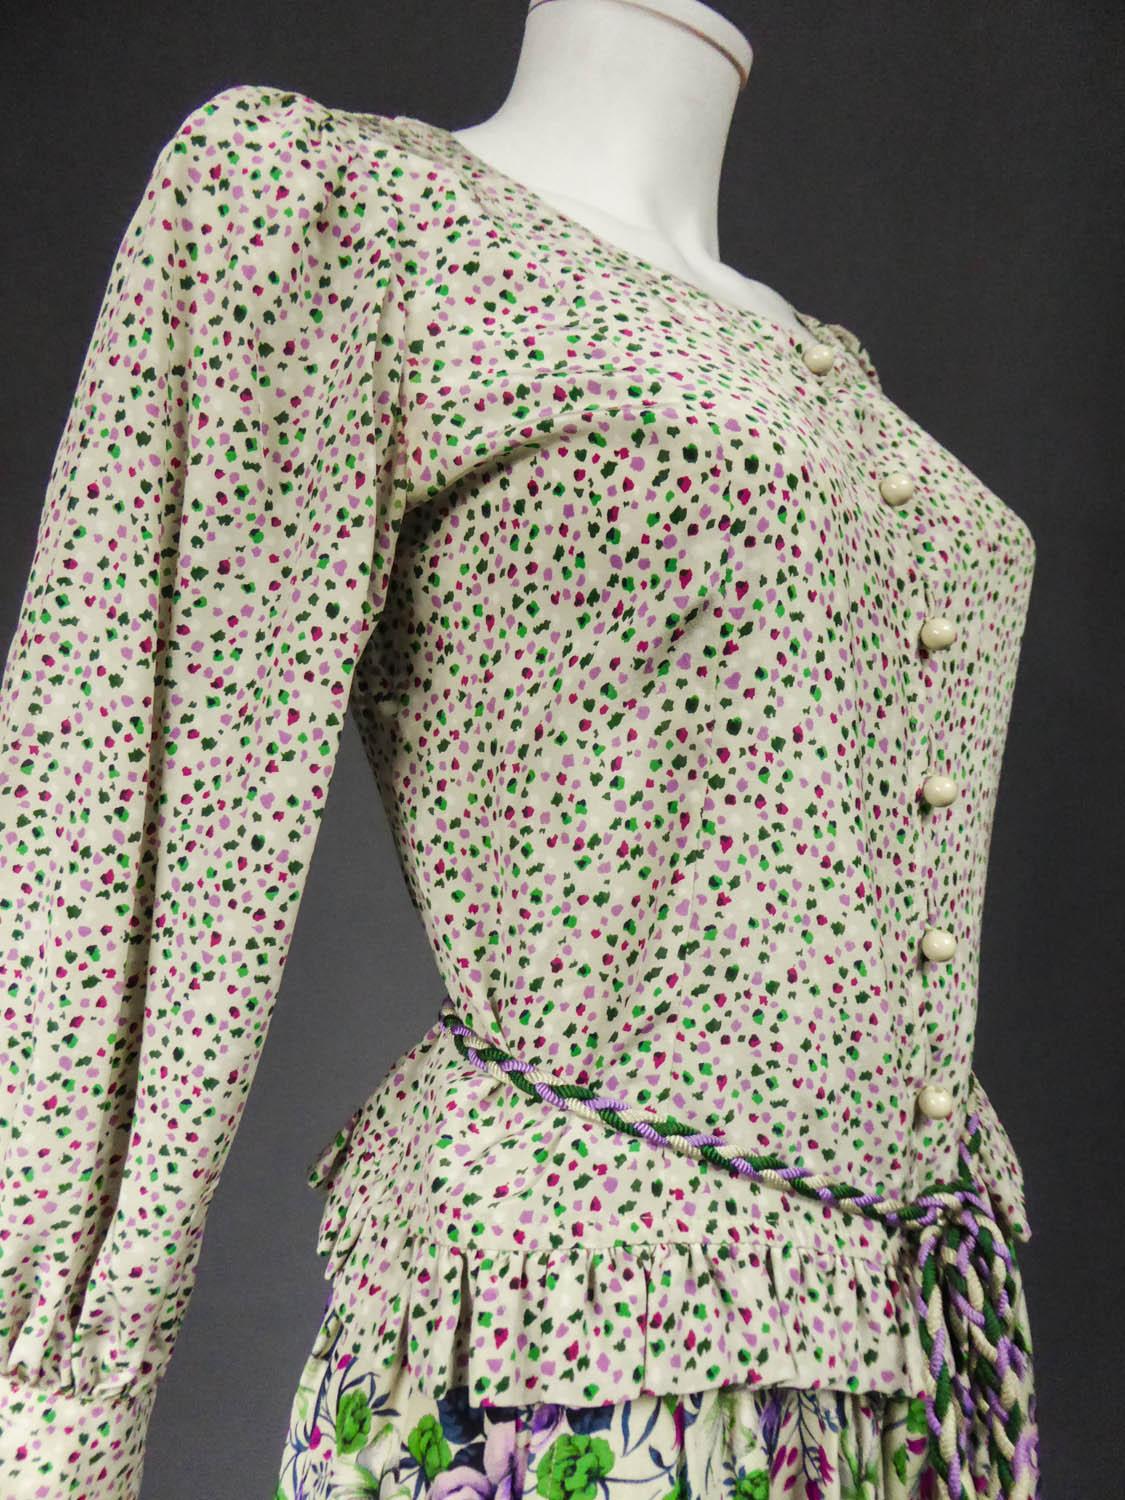  A French Ungaro Parallele Skirt Blouse and Belt Set - Circa 1978 / 1980 For Sale 6